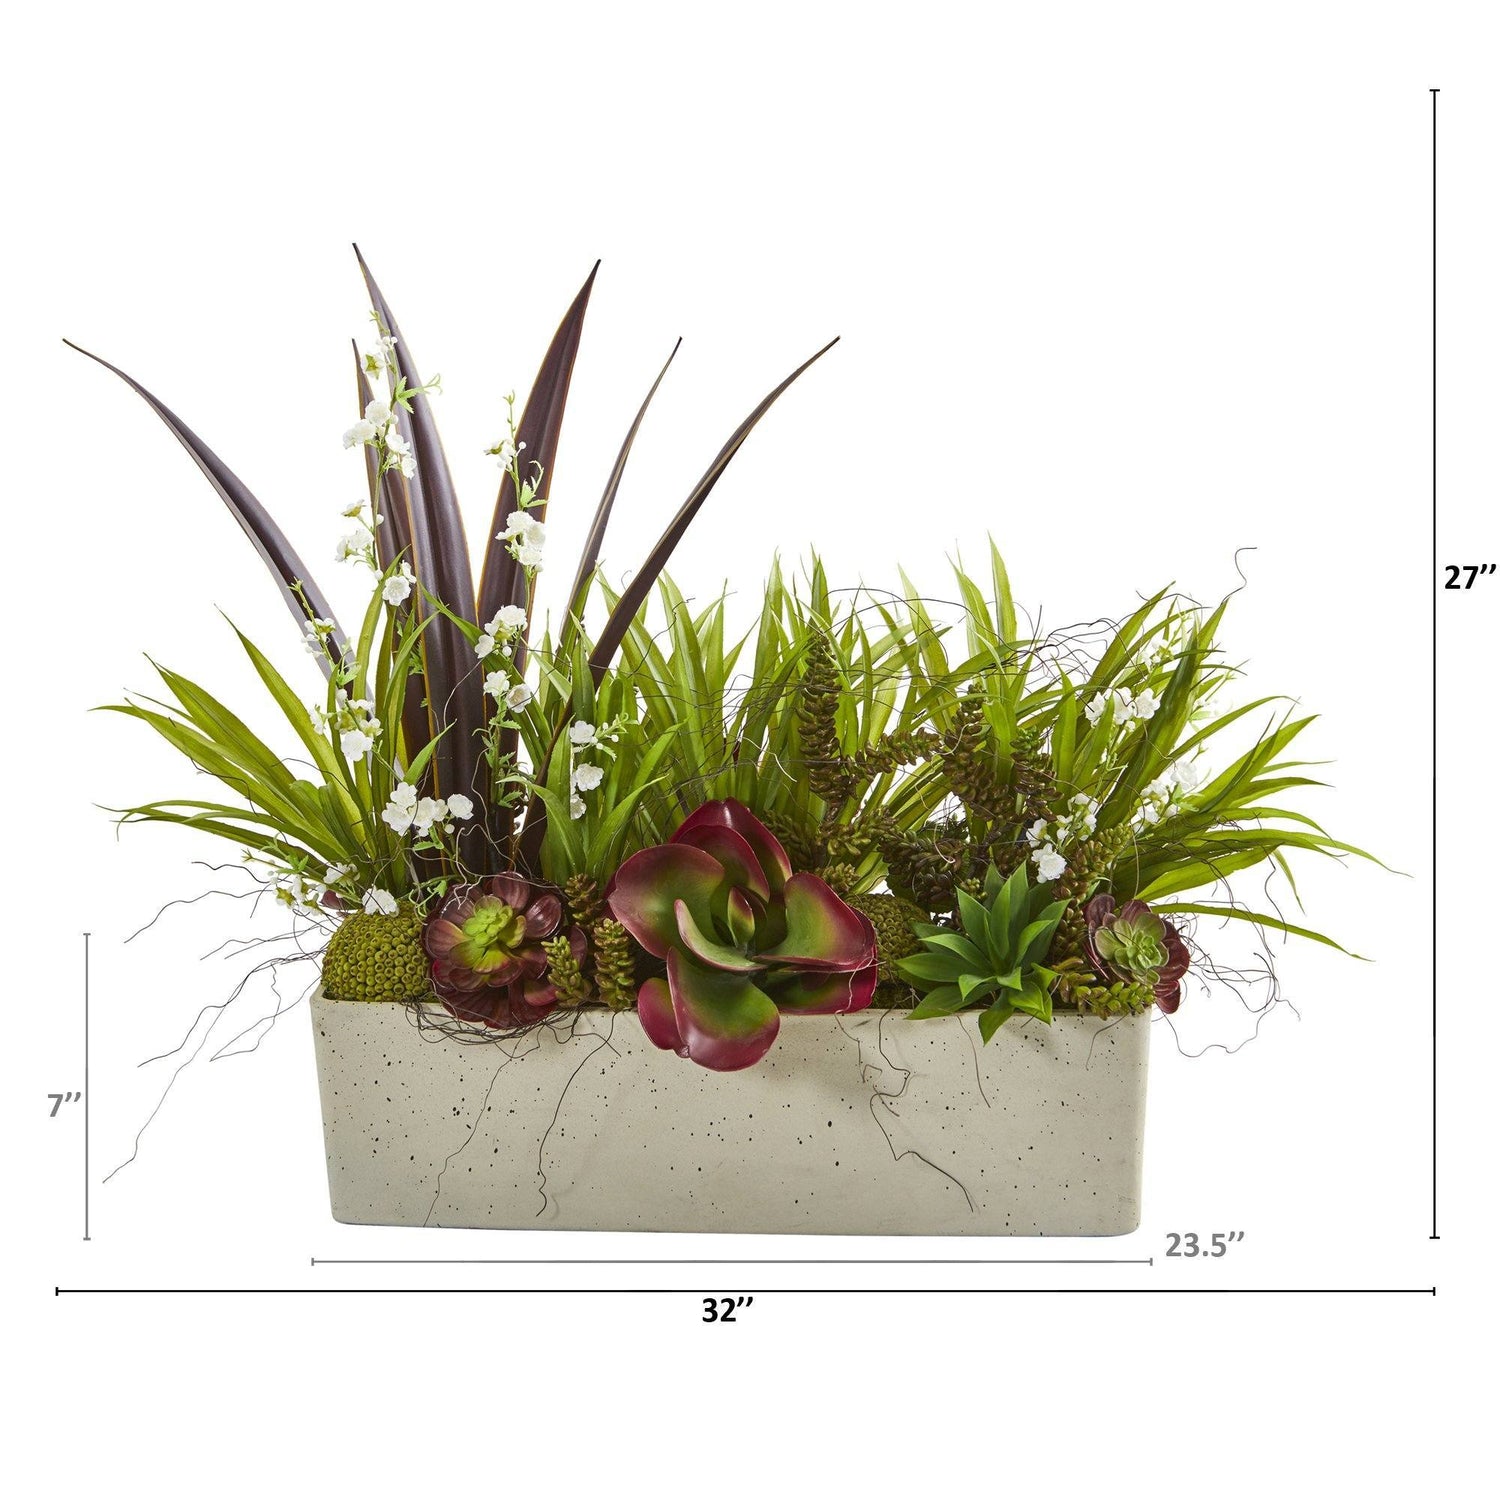 32” Mixed Succulent and Grass Garden Artificial Plant in White Planter